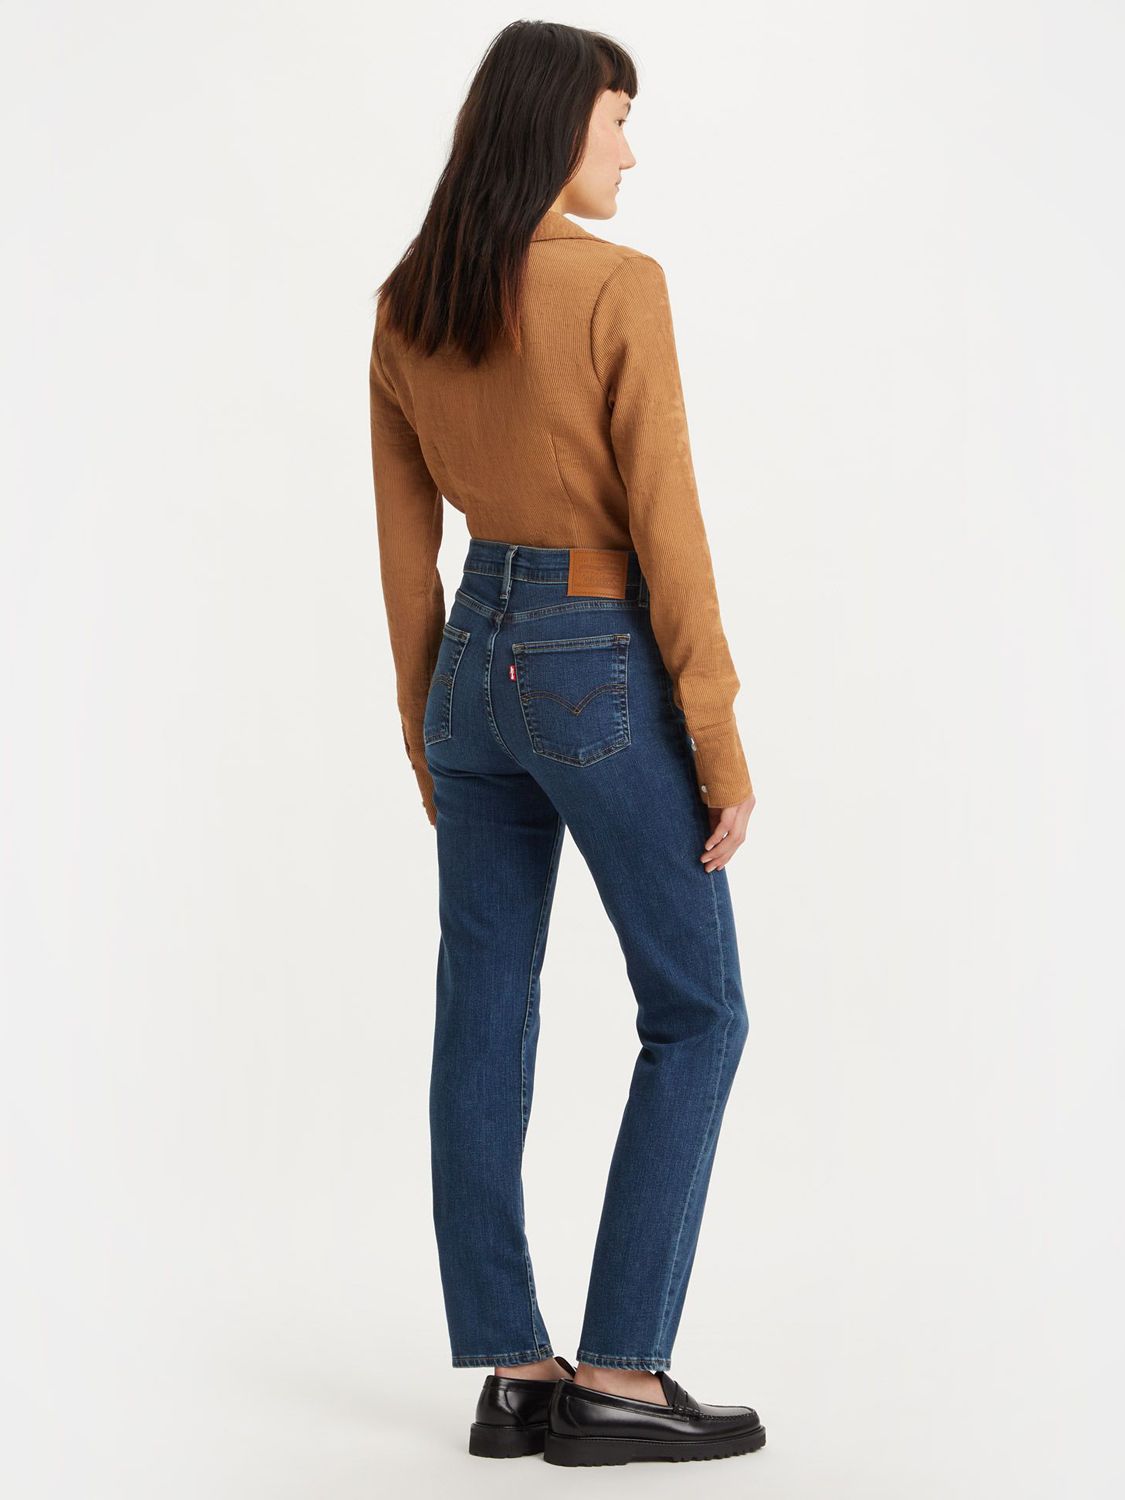 Buy Levi's 724 High Rise Straight Cut Jeans Online at johnlewis.com